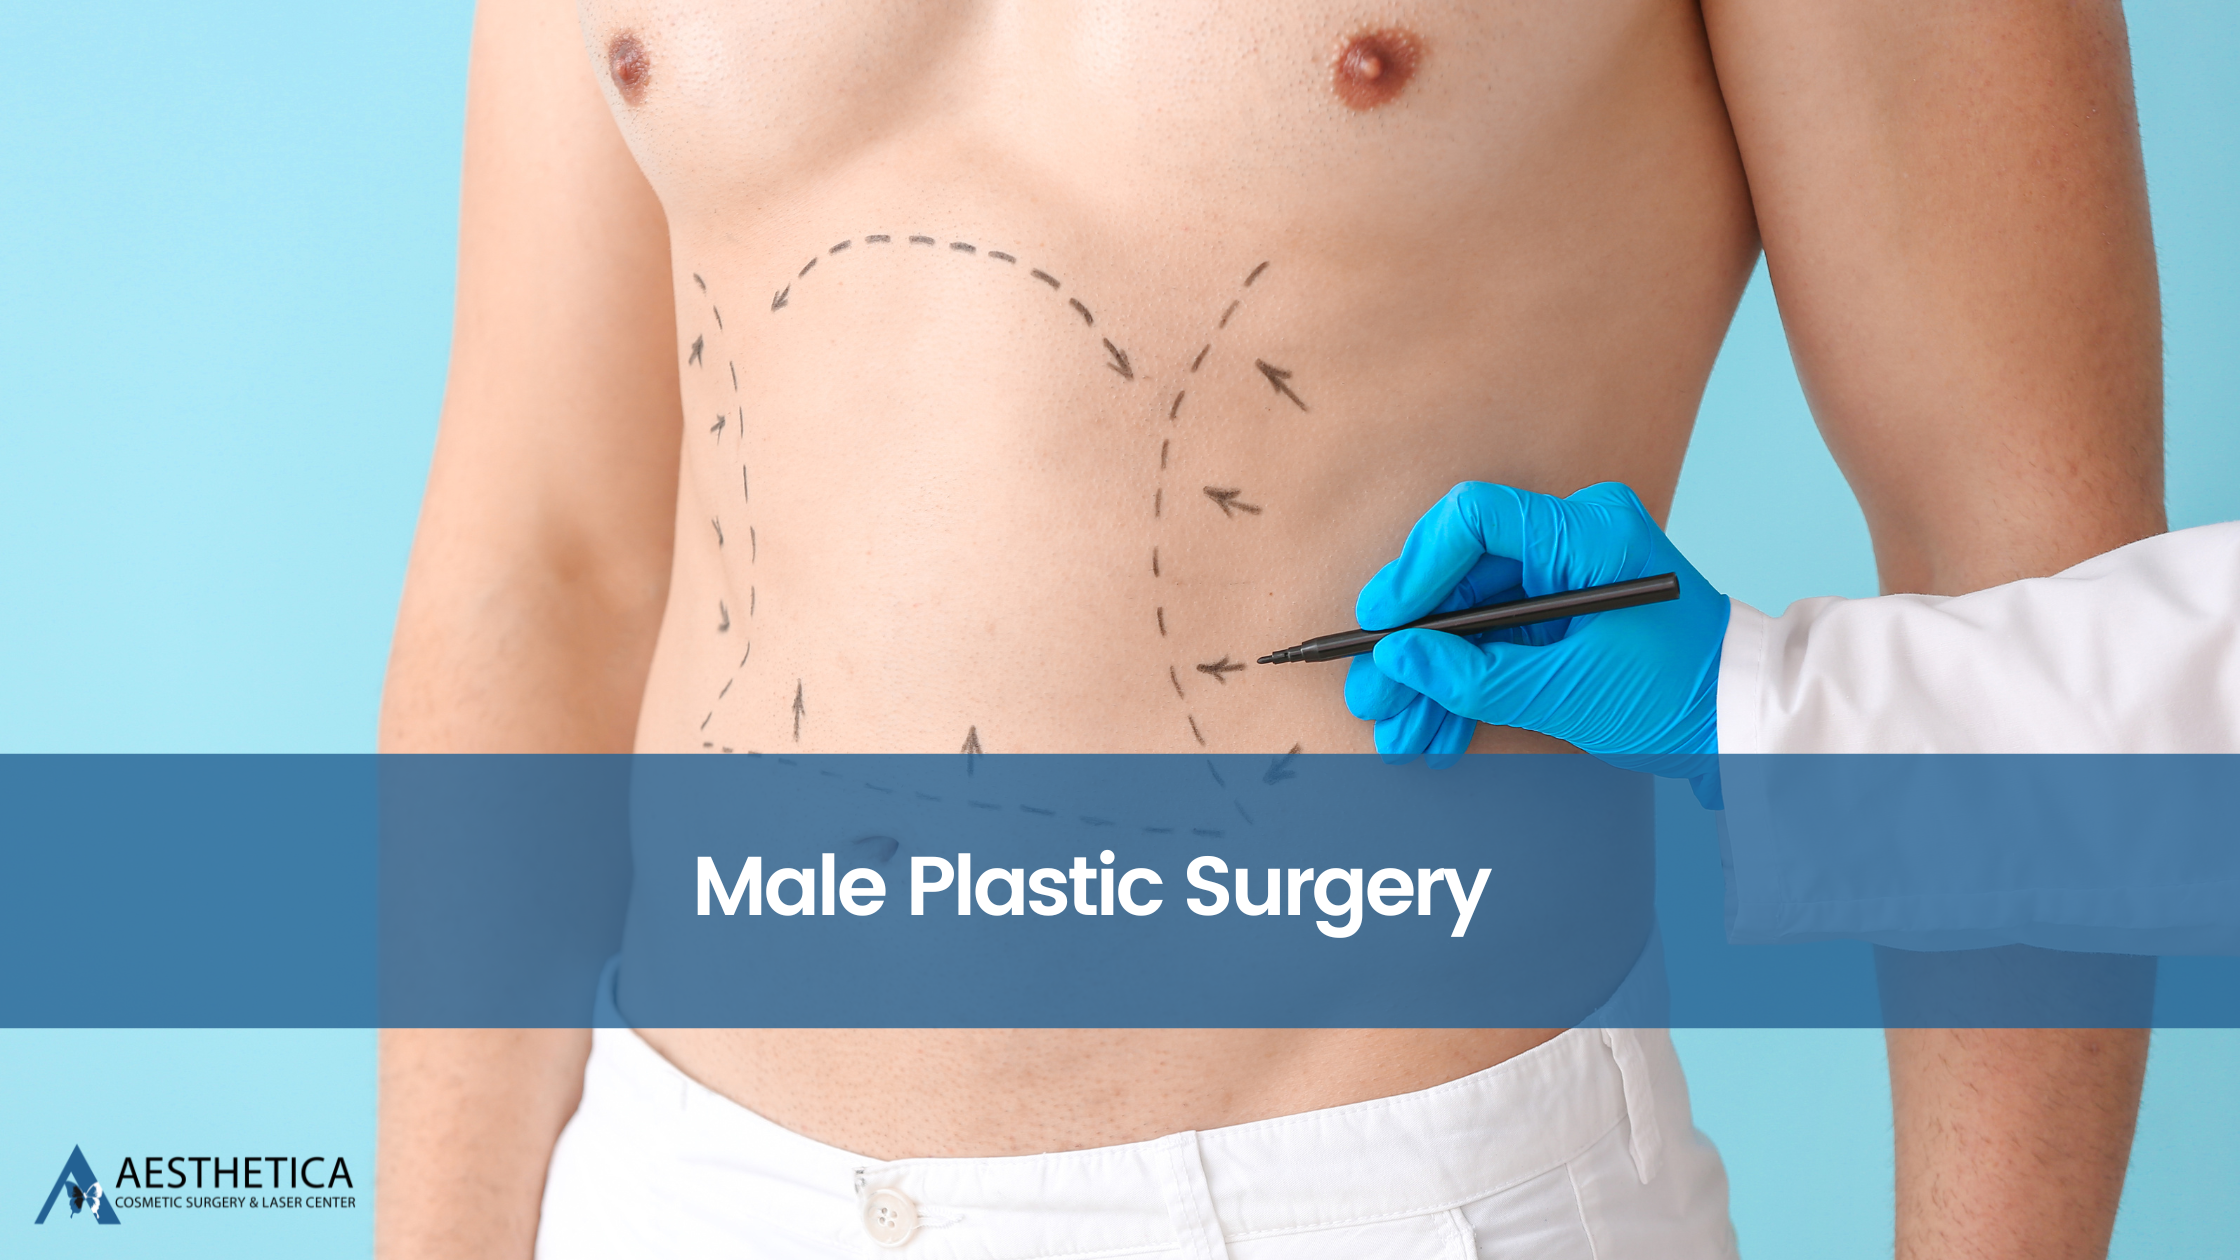 Male Plastic Surgery: Before and After